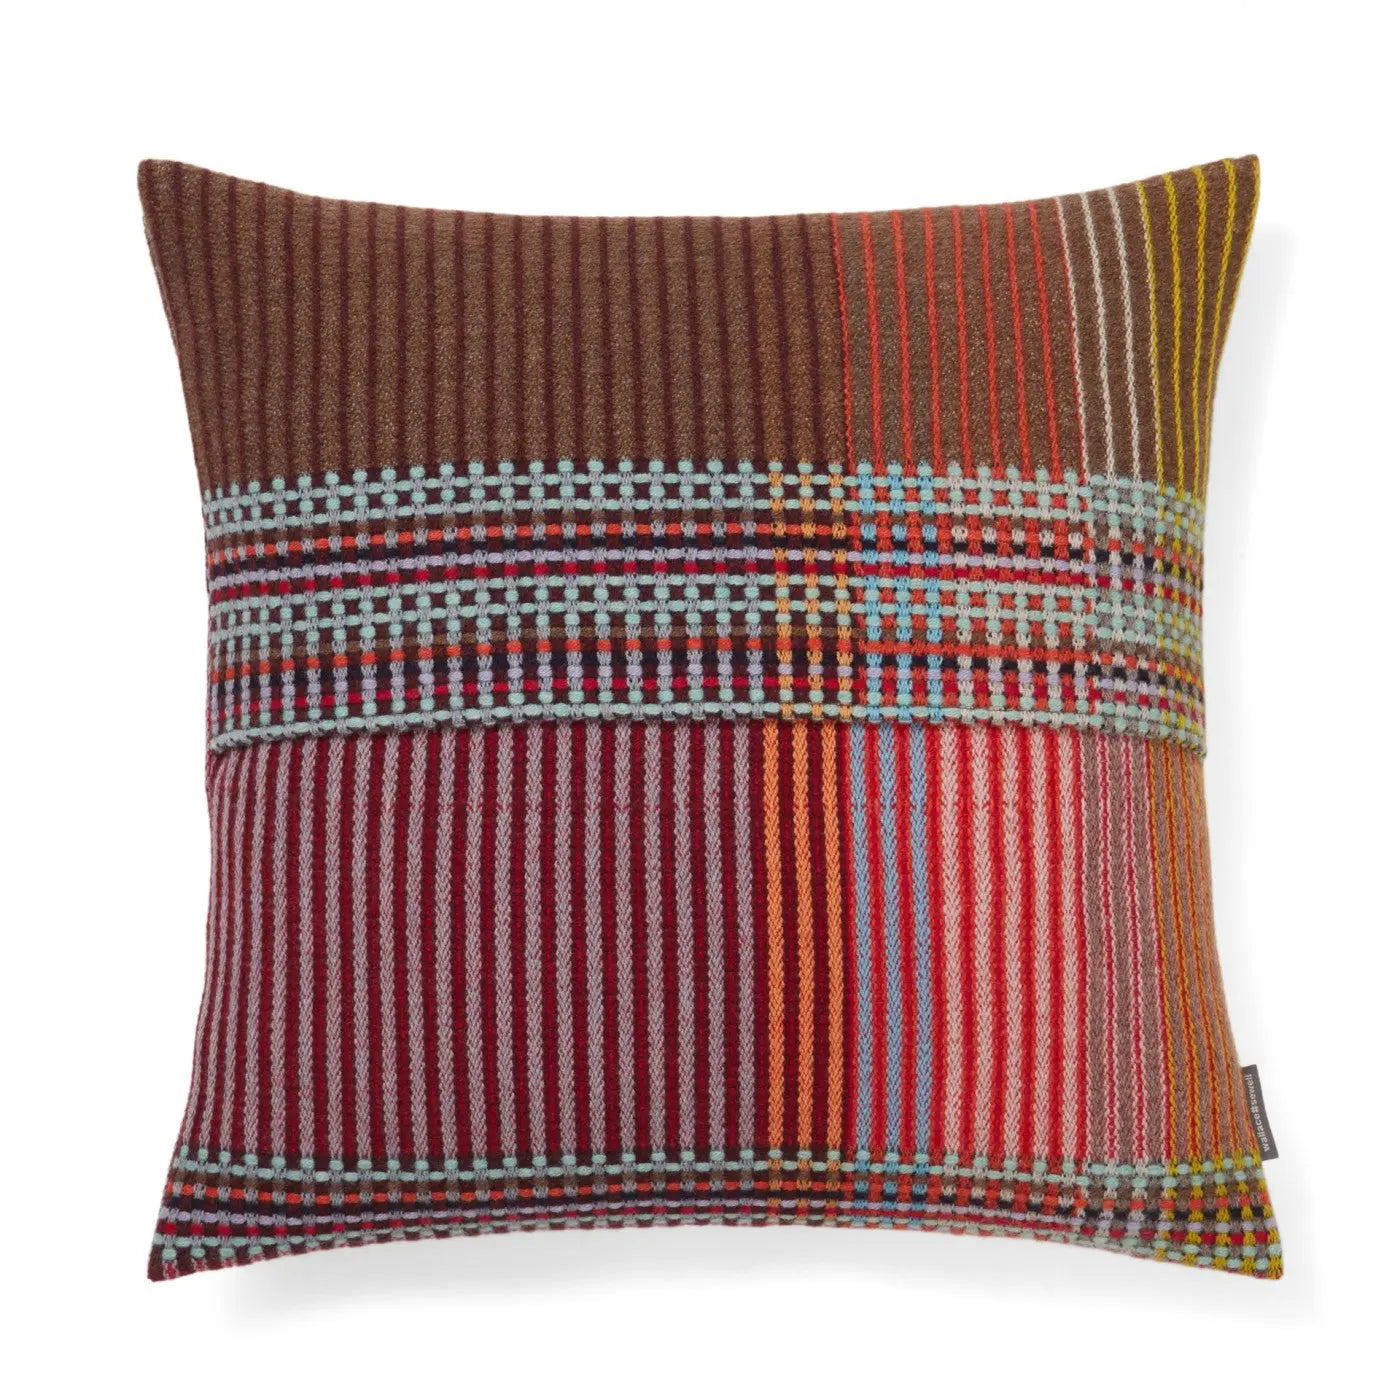 Wallace and Sewell-Rosalind Cushion Wallace & Sewell